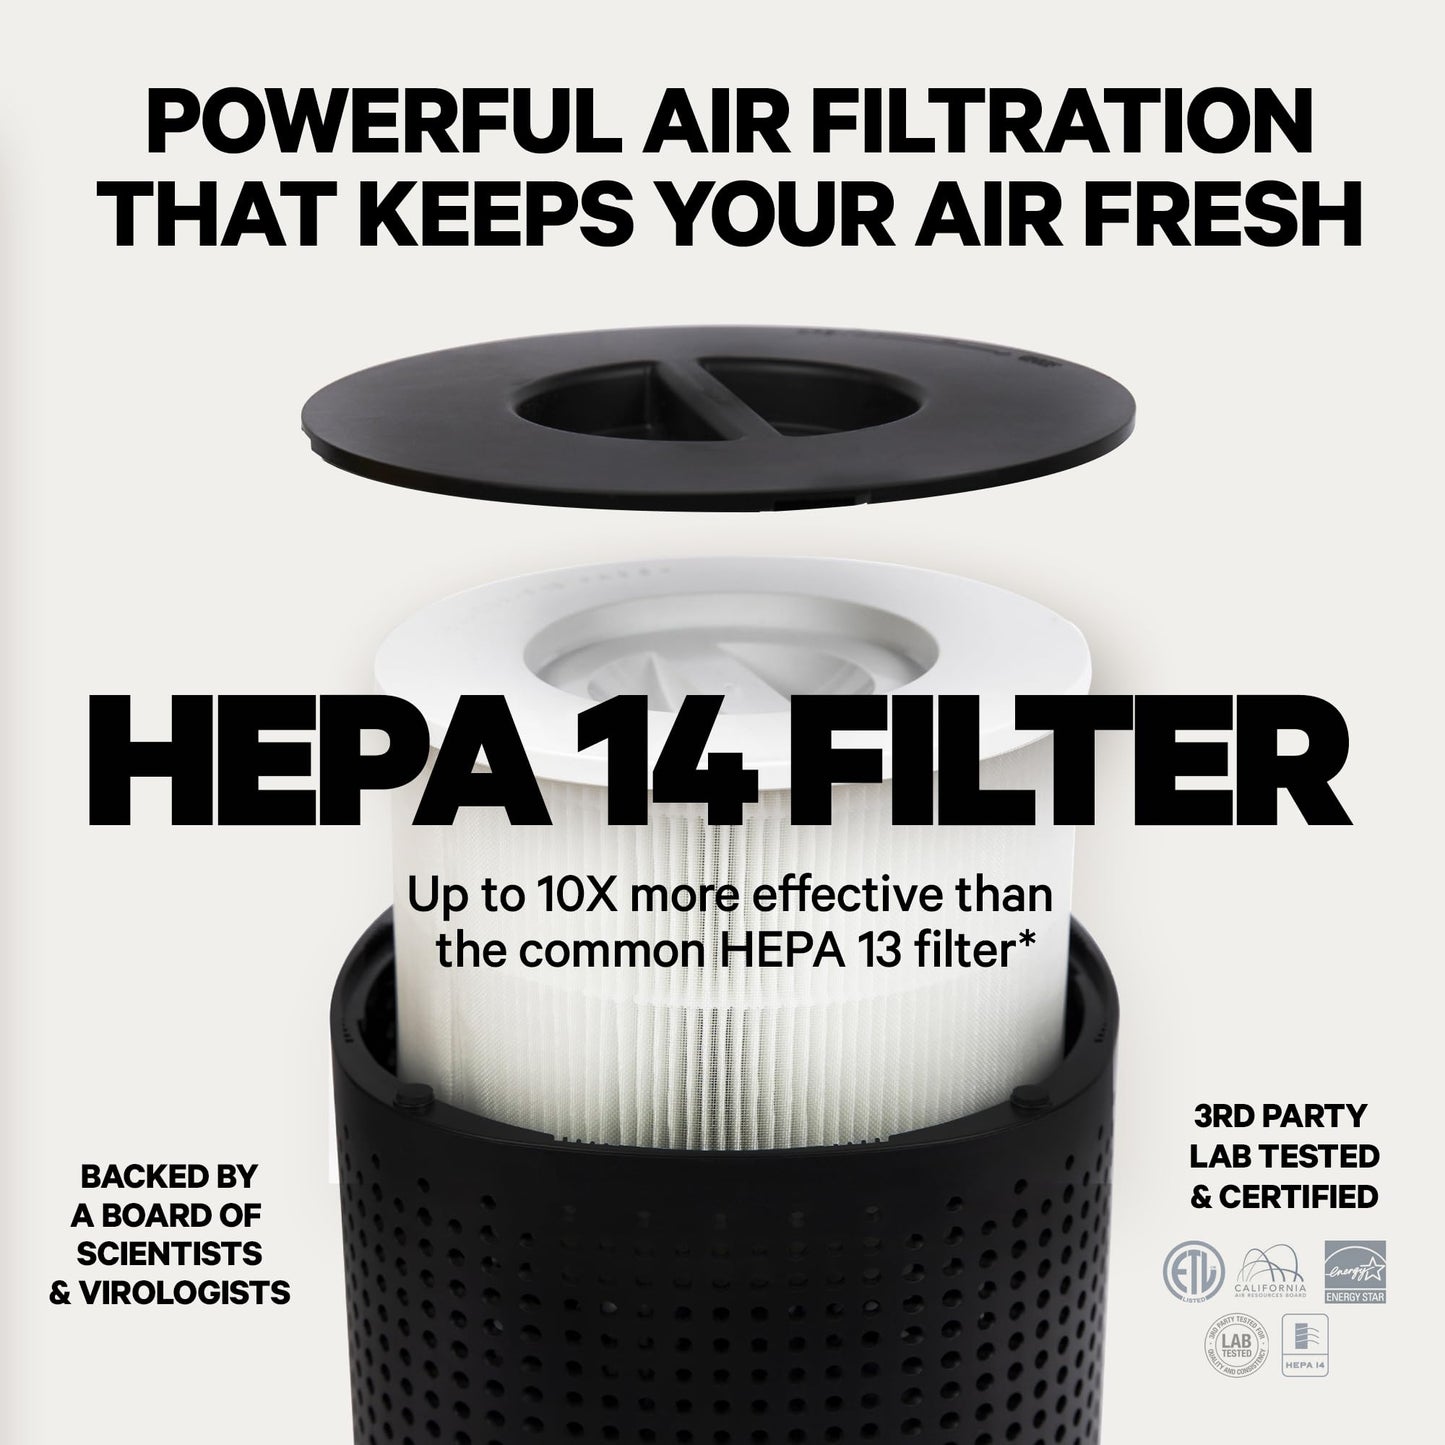 PuroAir HEPA 14 Air Purifier for Home - Covers 1,115 Sq Ft - Air Purifier for Allergies - For Large Rooms - Filters Up To 99.99% of Pet Dander,